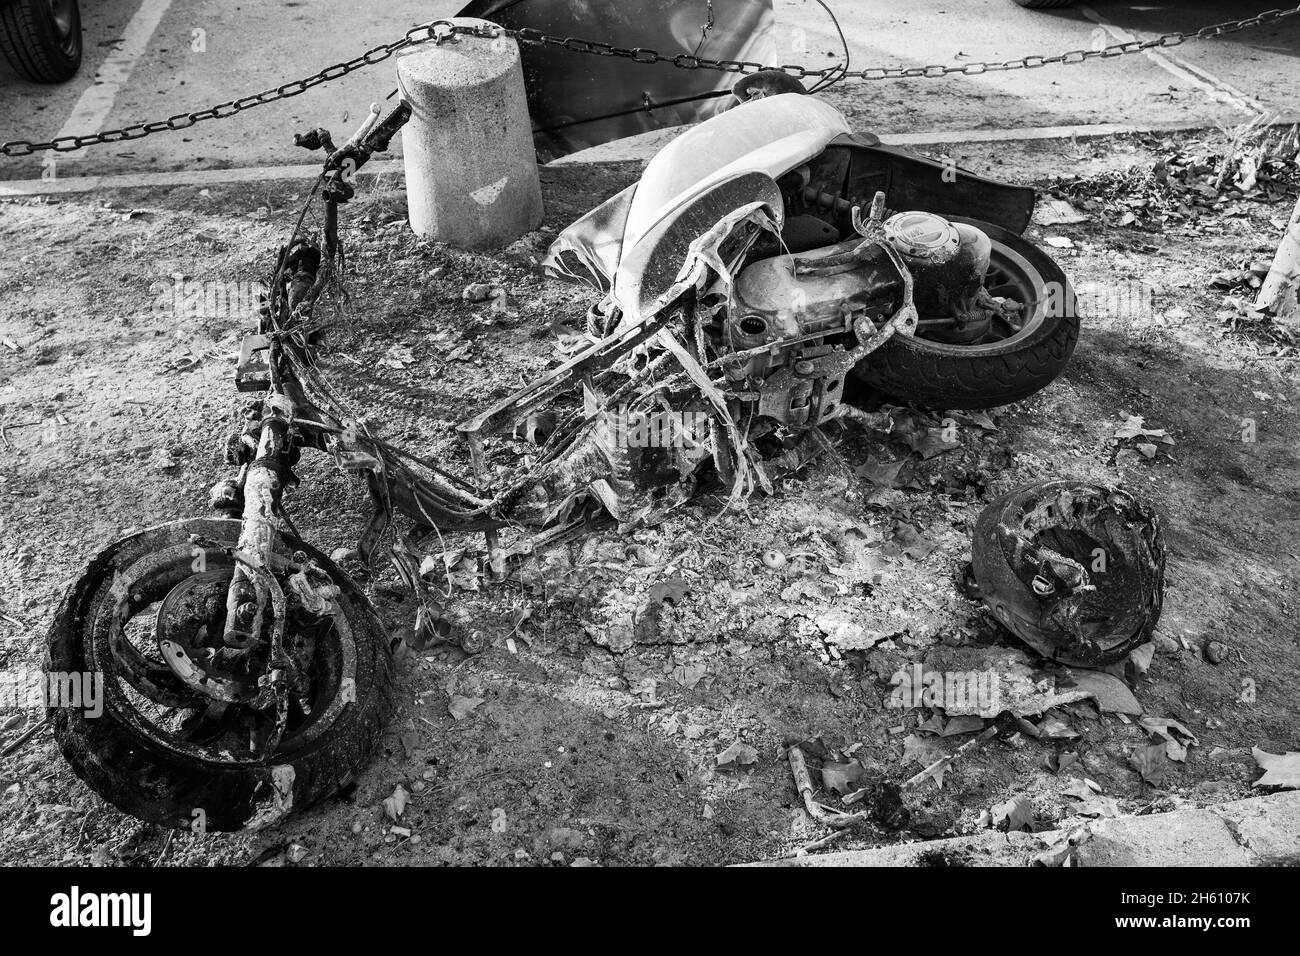 Burnt out motor scooter close-up. Black and white photography Stock Photo